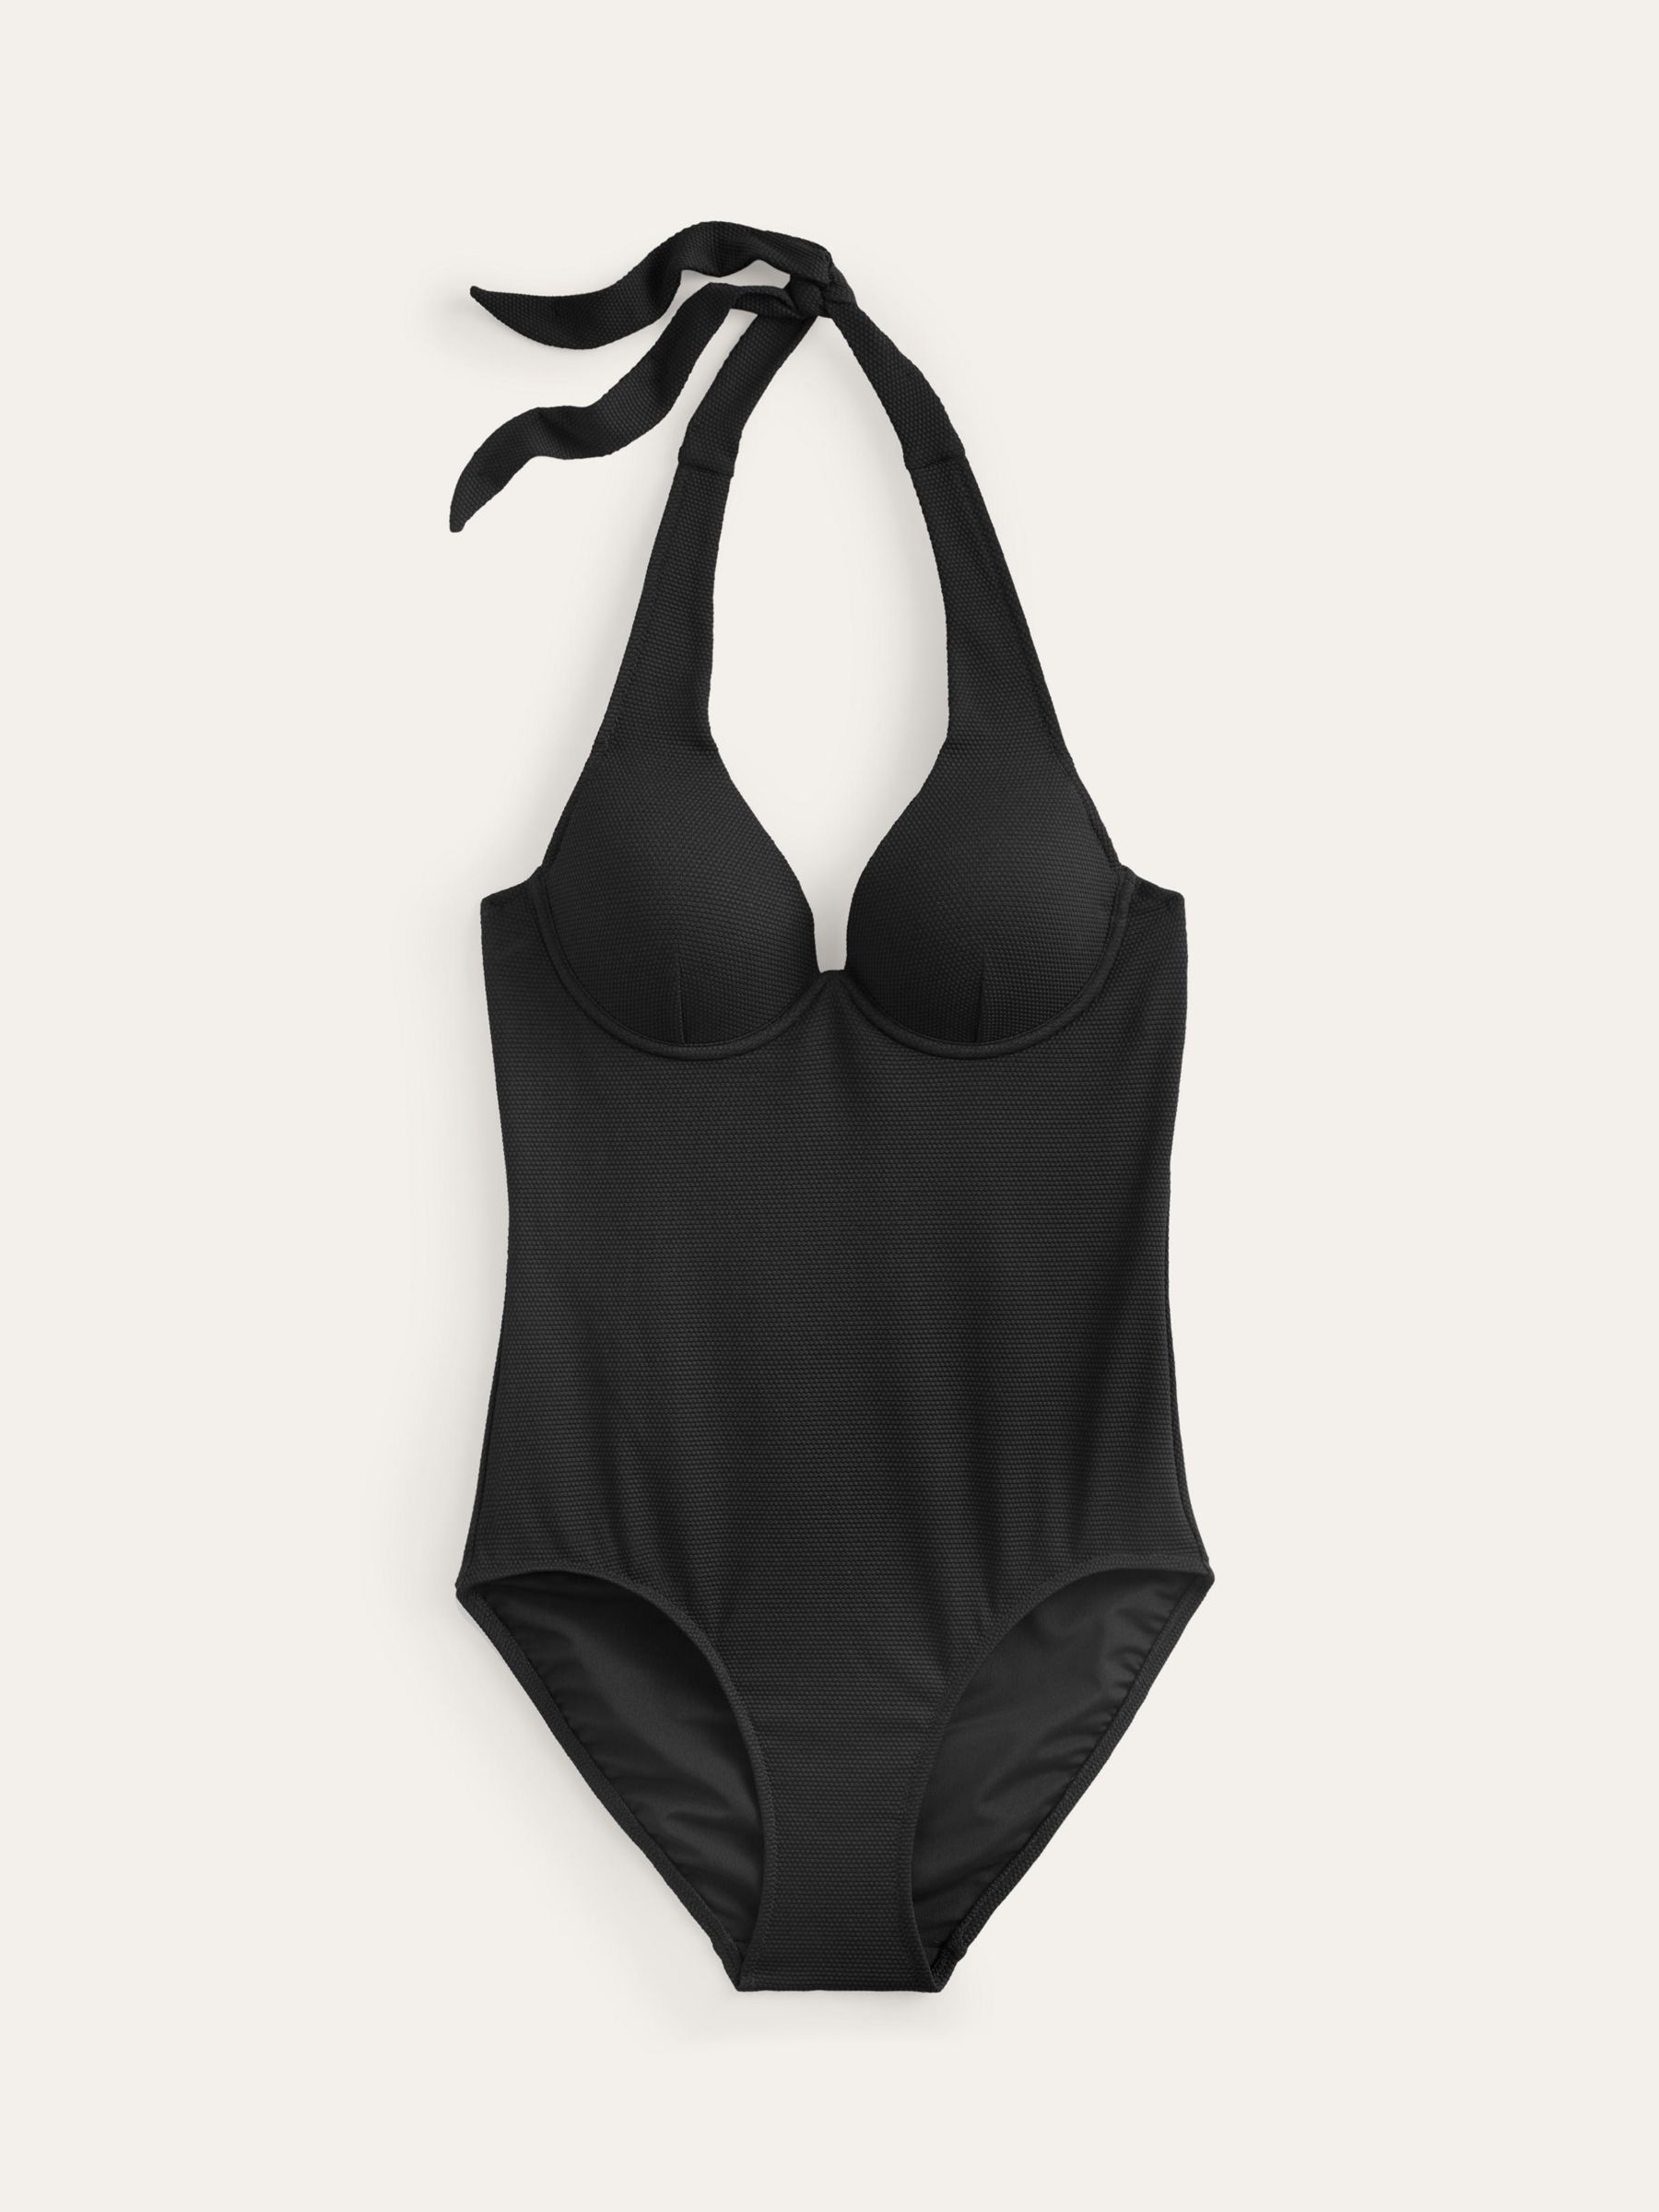 Buy Boden The Lifter Enhancer Underwired Swimsuit, Black Honeycomb Online at johnlewis.com